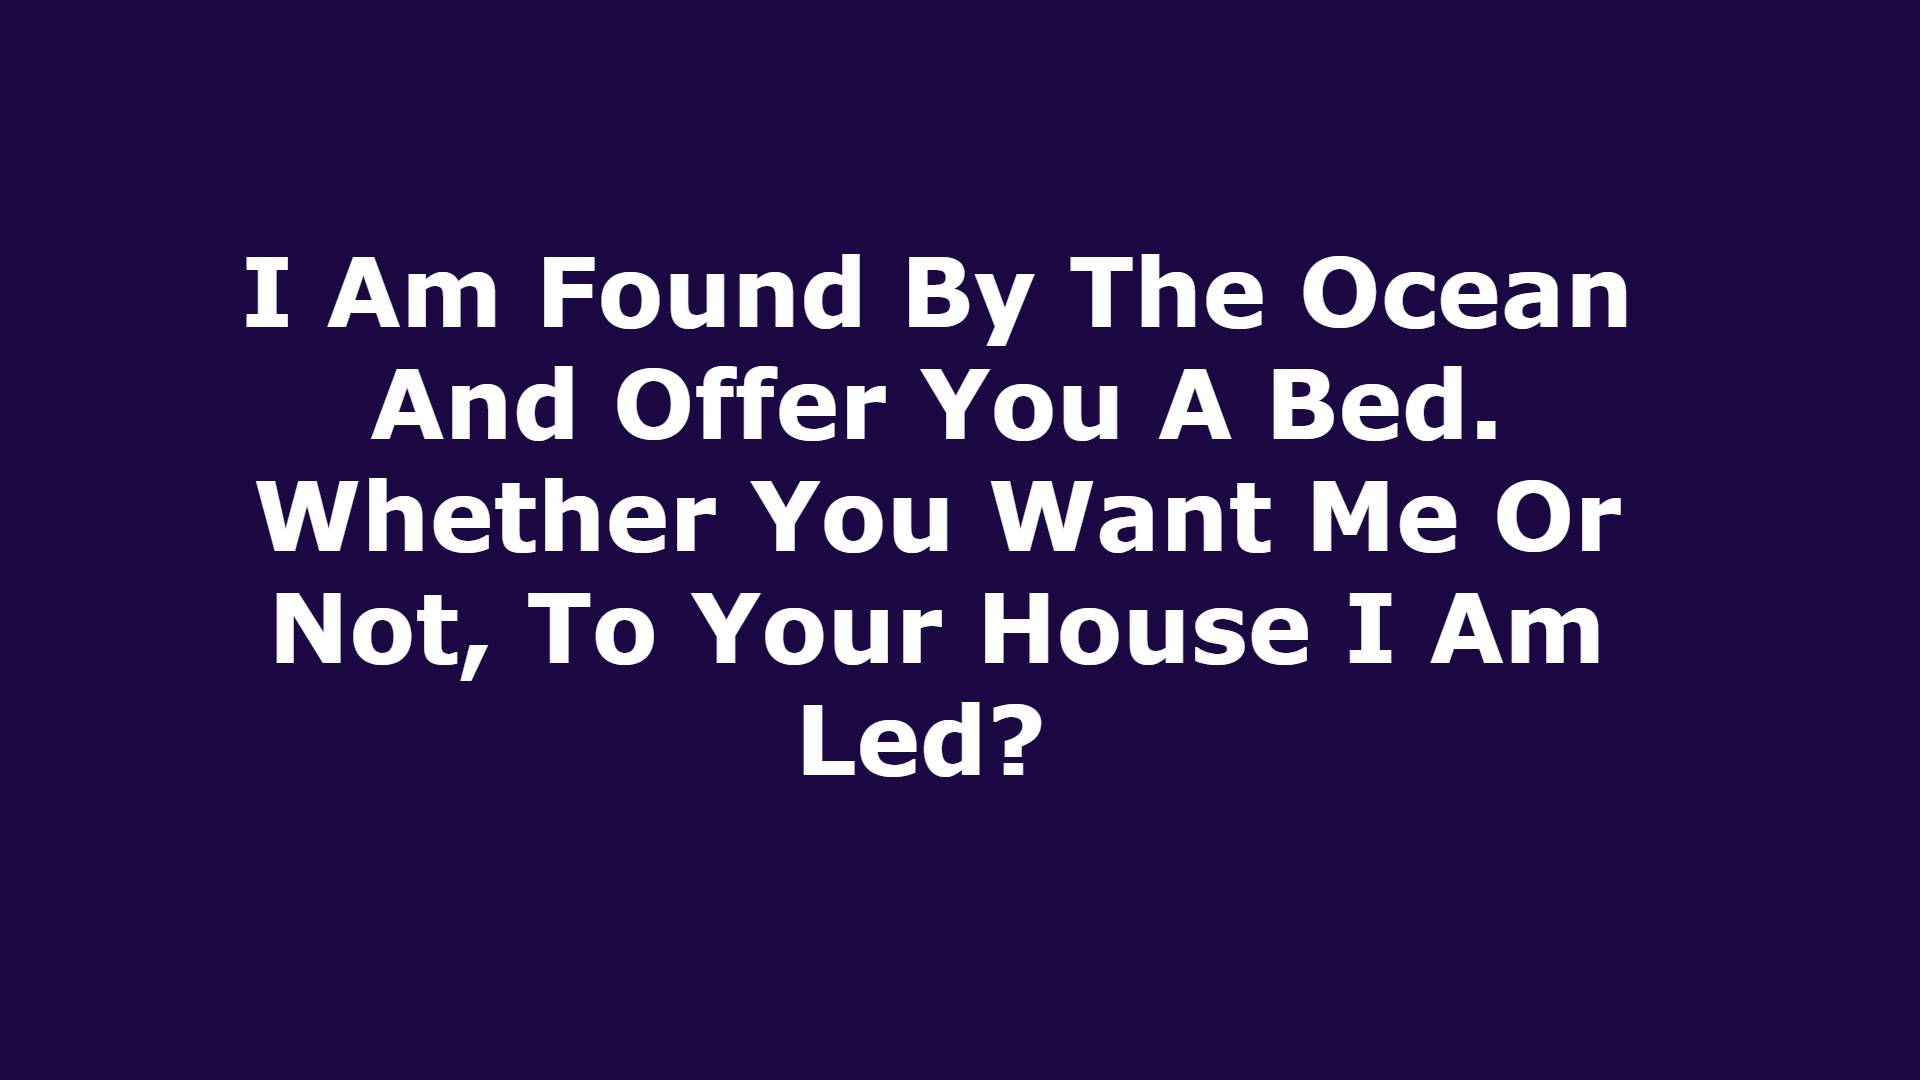 I Am Found By The Ocean And Offer You A Bed. Whether You Want Me Or Not, To Your House I Am Led?